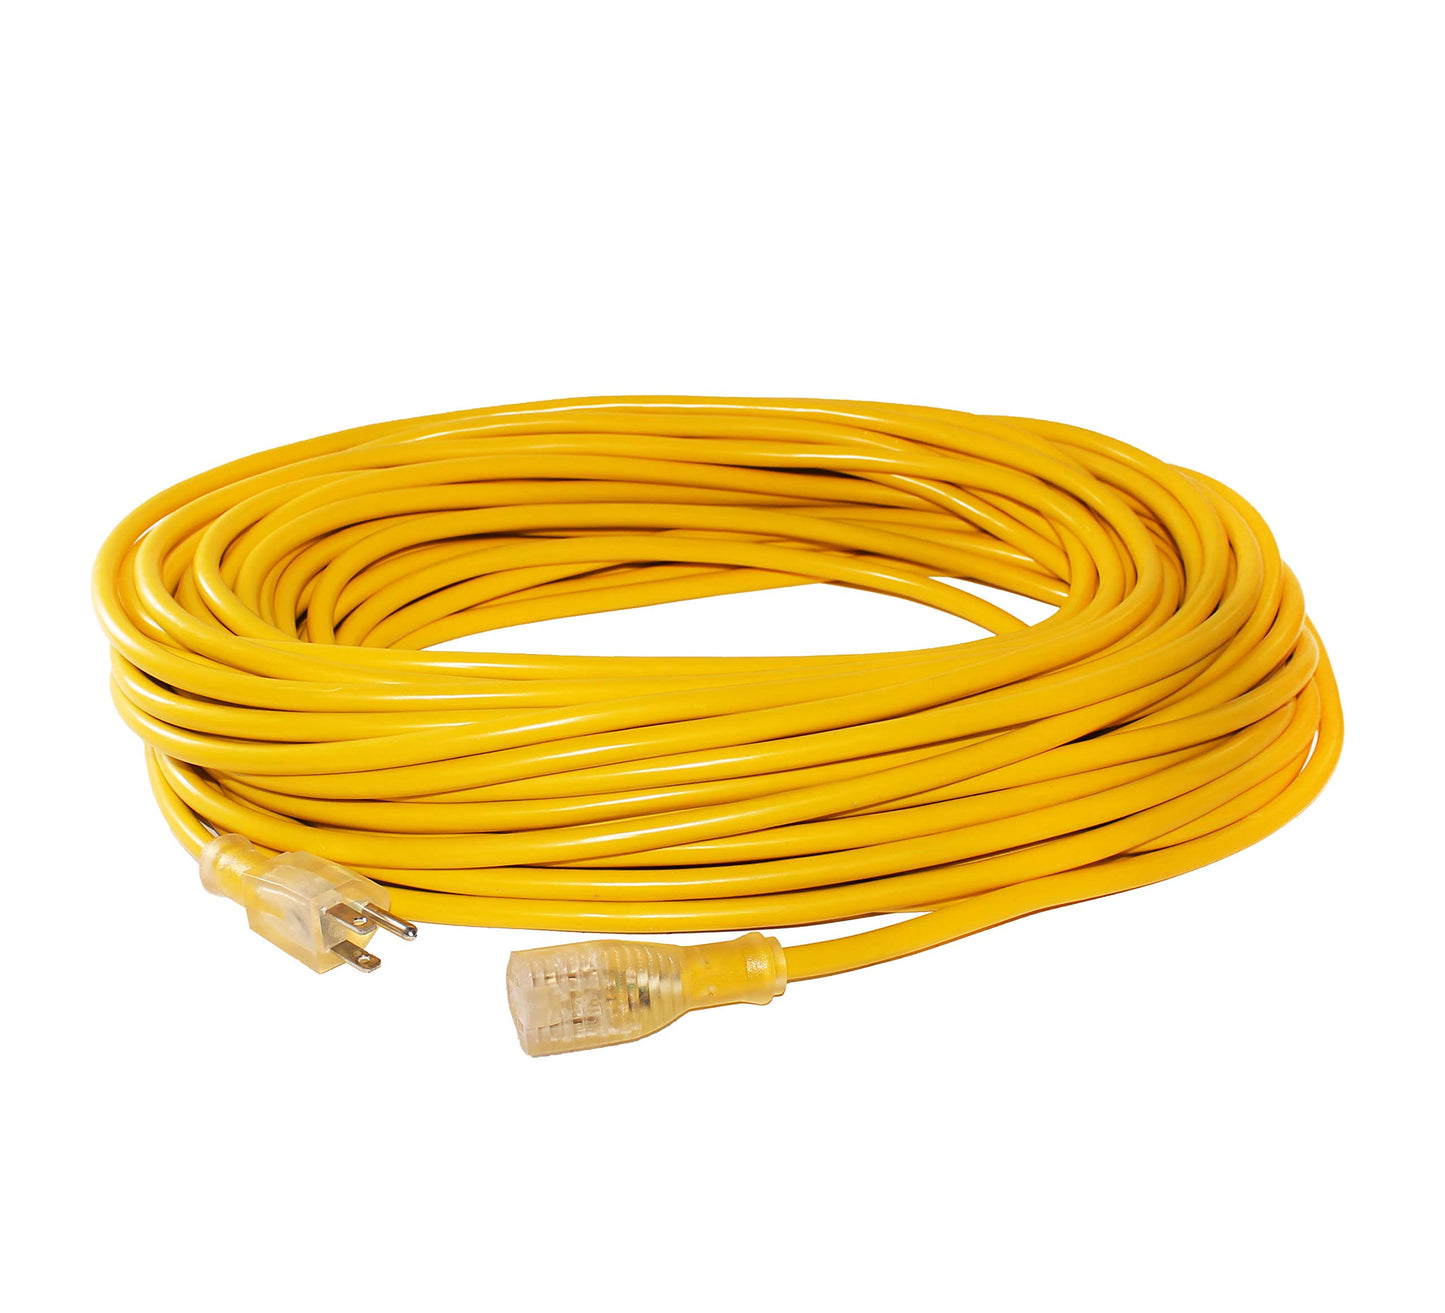 100 ft Power Extension Cord Outdoor & Indoor Heavy Duty 16 Gauge/3 Prong SJTW (Yellow) Lighted end Extra Durability 10 AMP 125 Volts 1250 Watts by LifeSupplyUSA 100 Feet Yellow